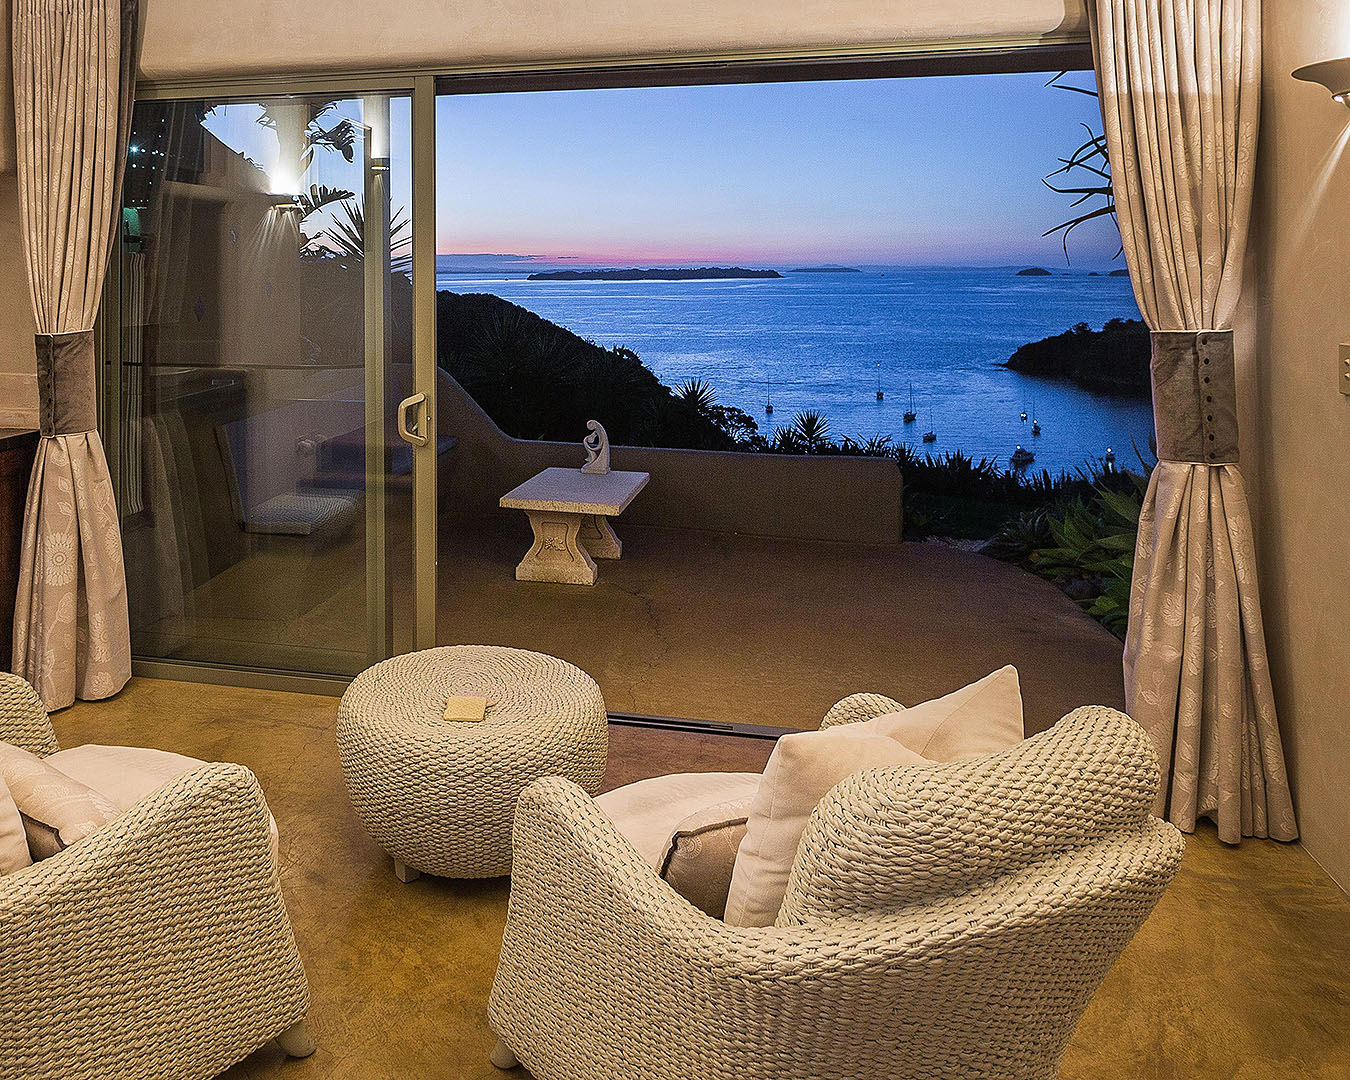 A room looks out on a stunning sunset on Delamore Lodge on Waiheke Island.